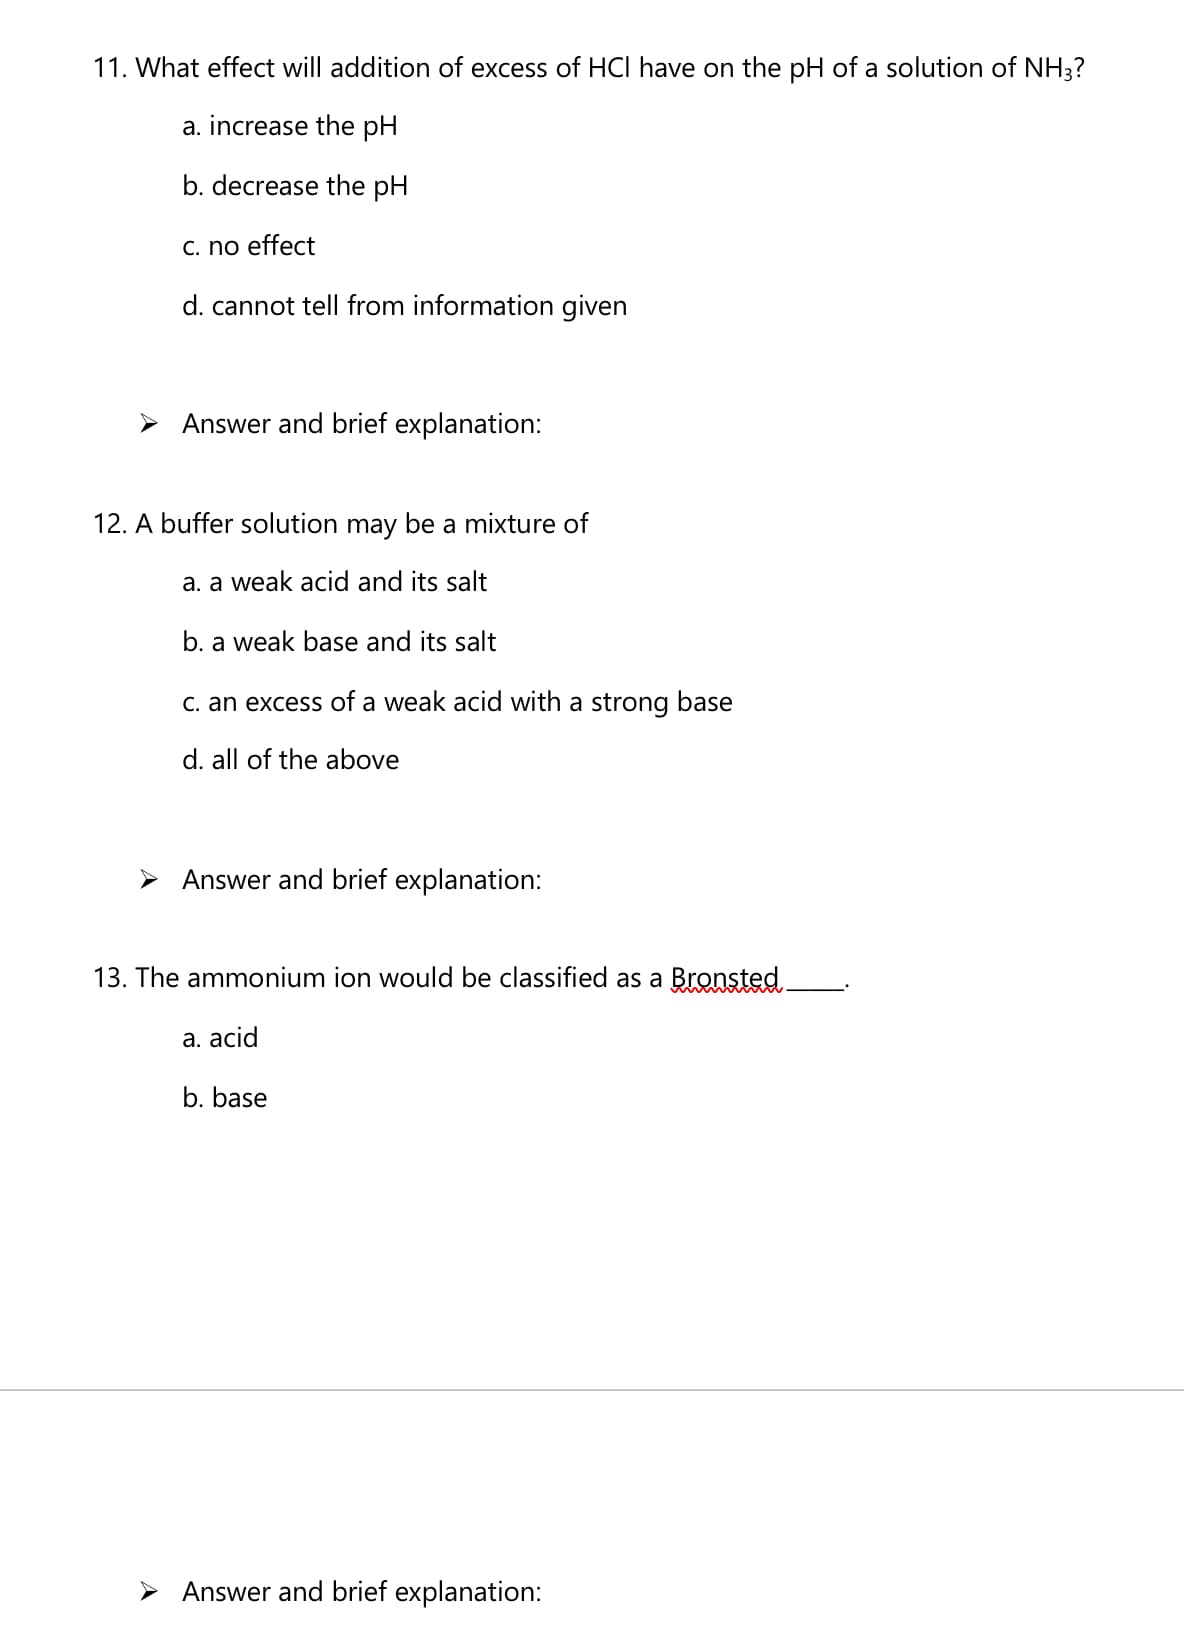 11. What effect will addition of excess of HCI have on the pH of a solution of NH3?
a. increase the pH
b. decrease the pH
C. no effect
d. cannot tell from information given
> Answer and brief explanation:
12. A buffer solution may be a mixture of
a. a weak acid and its salt
b. a weak base and its salt
C. an excess of a weak acid with a strong base
d. all of the above
> Answer and brief explanation:
13. The ammonium ion would be classified as a Bronsted
a. acid
b. base
> Answer and brief explanation:
